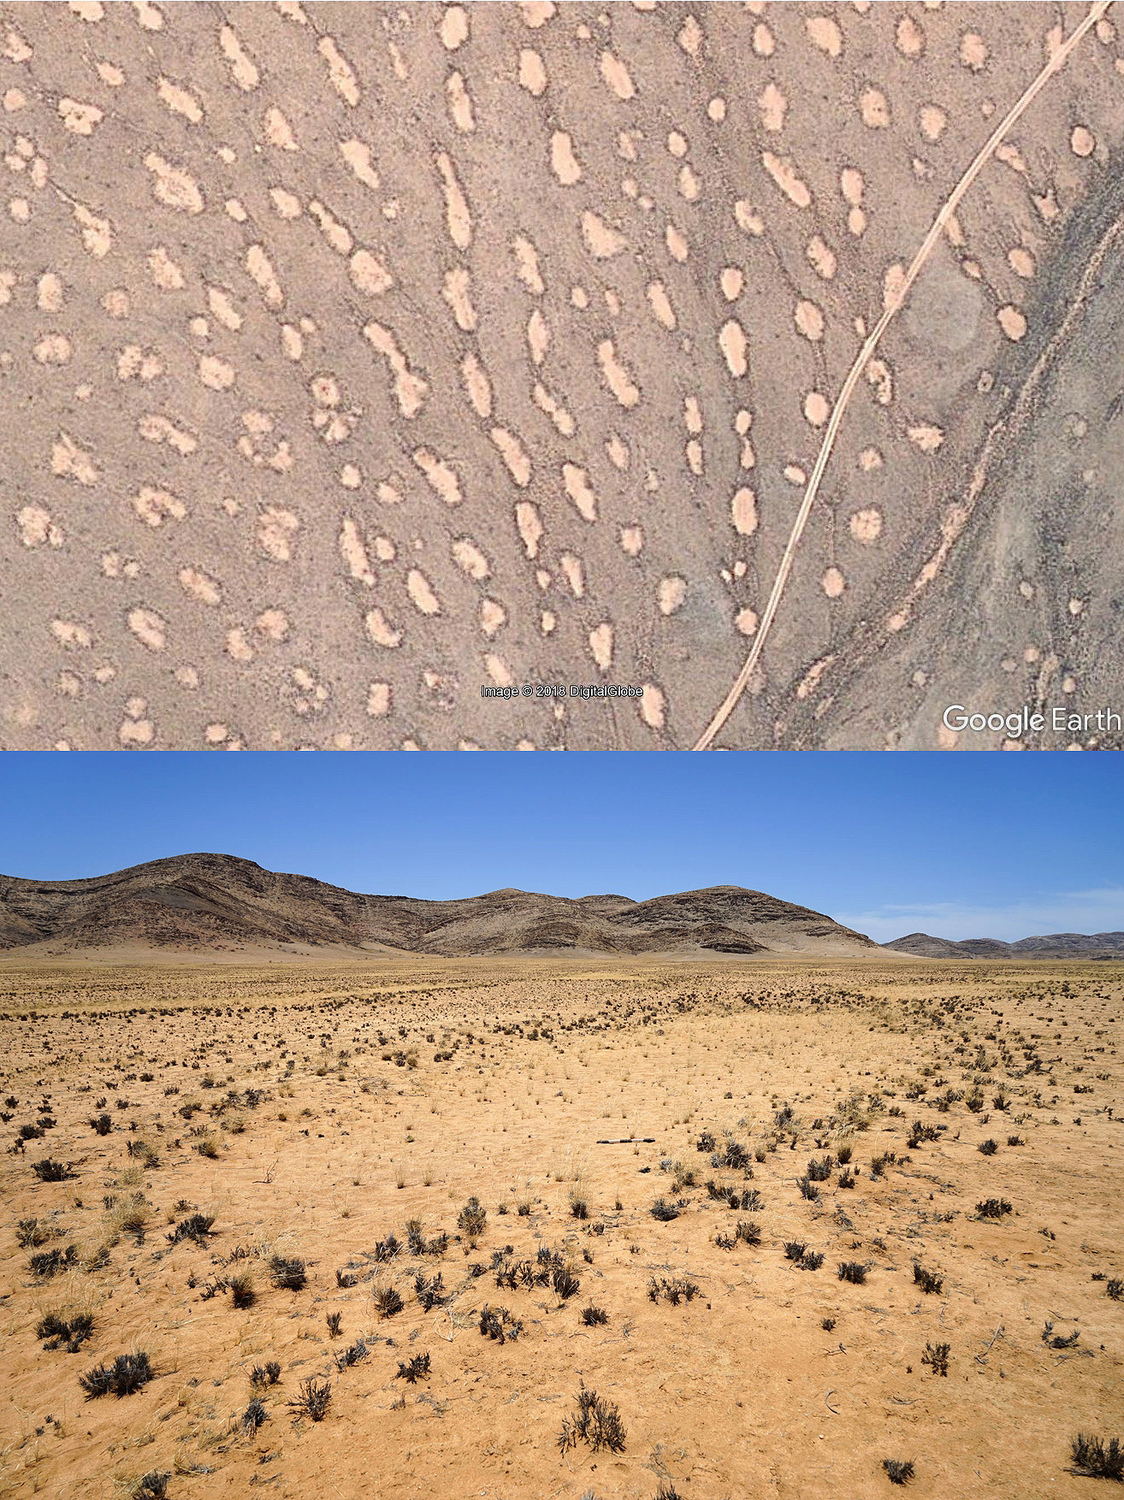 Oval-shaped mega fairy circles form a chain-like structure along a drainage line in Namibia.